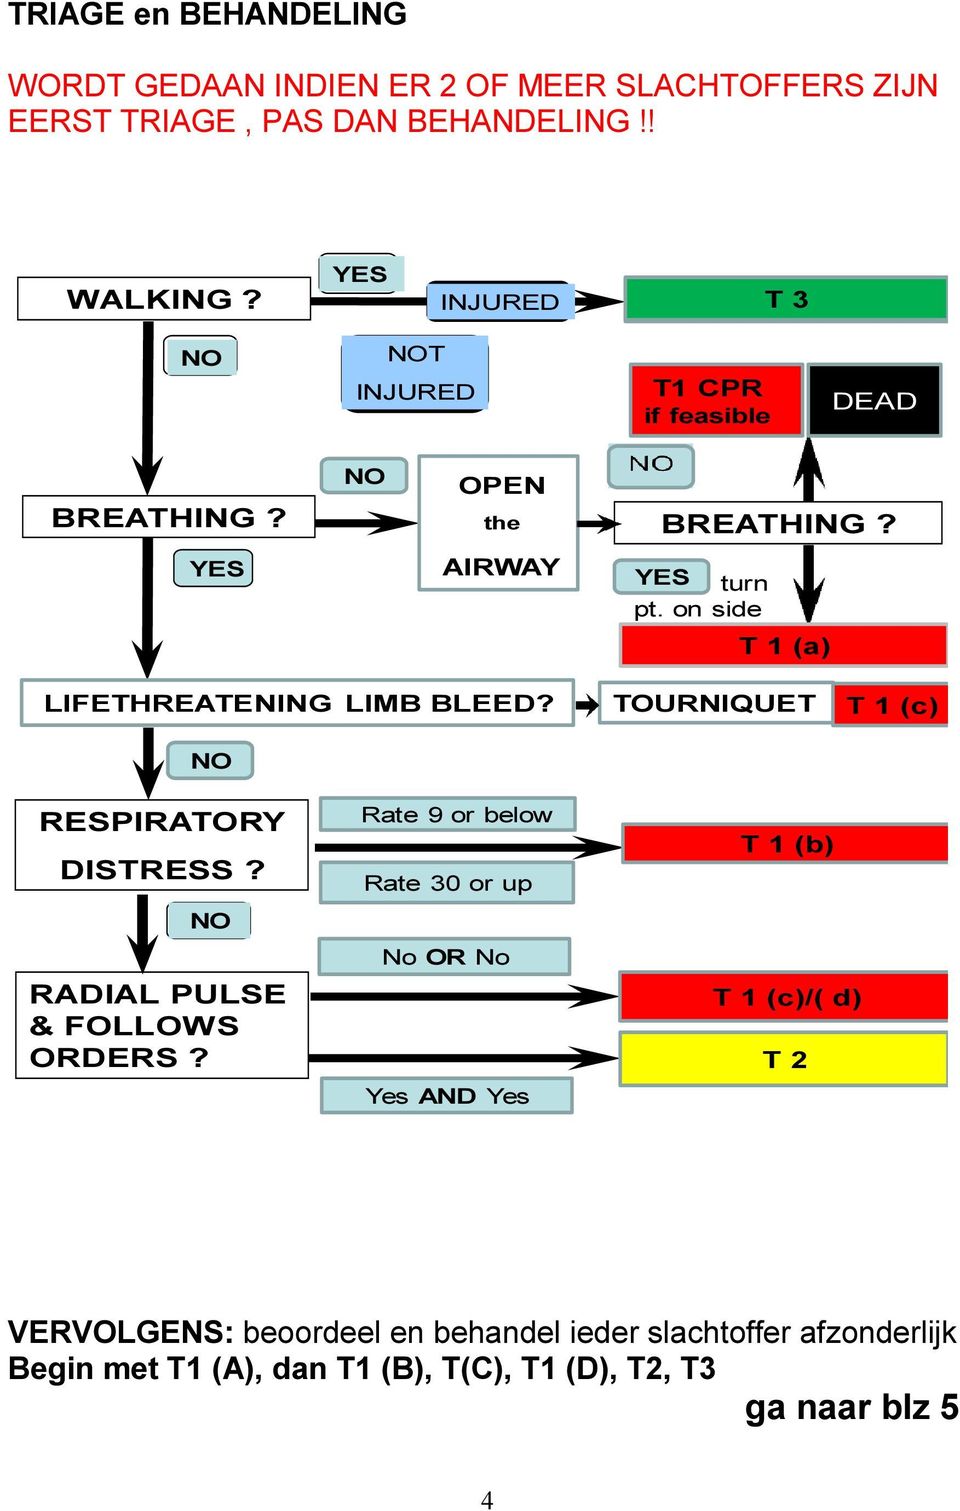 on side T 1 (a) LIFETHREATENING LIMB BLEED? NO TOURNIQUET T 1 (c) RESPIRATORY DISTRESS? NO RADIAL PULSE & FOLLOWS ORDERS?